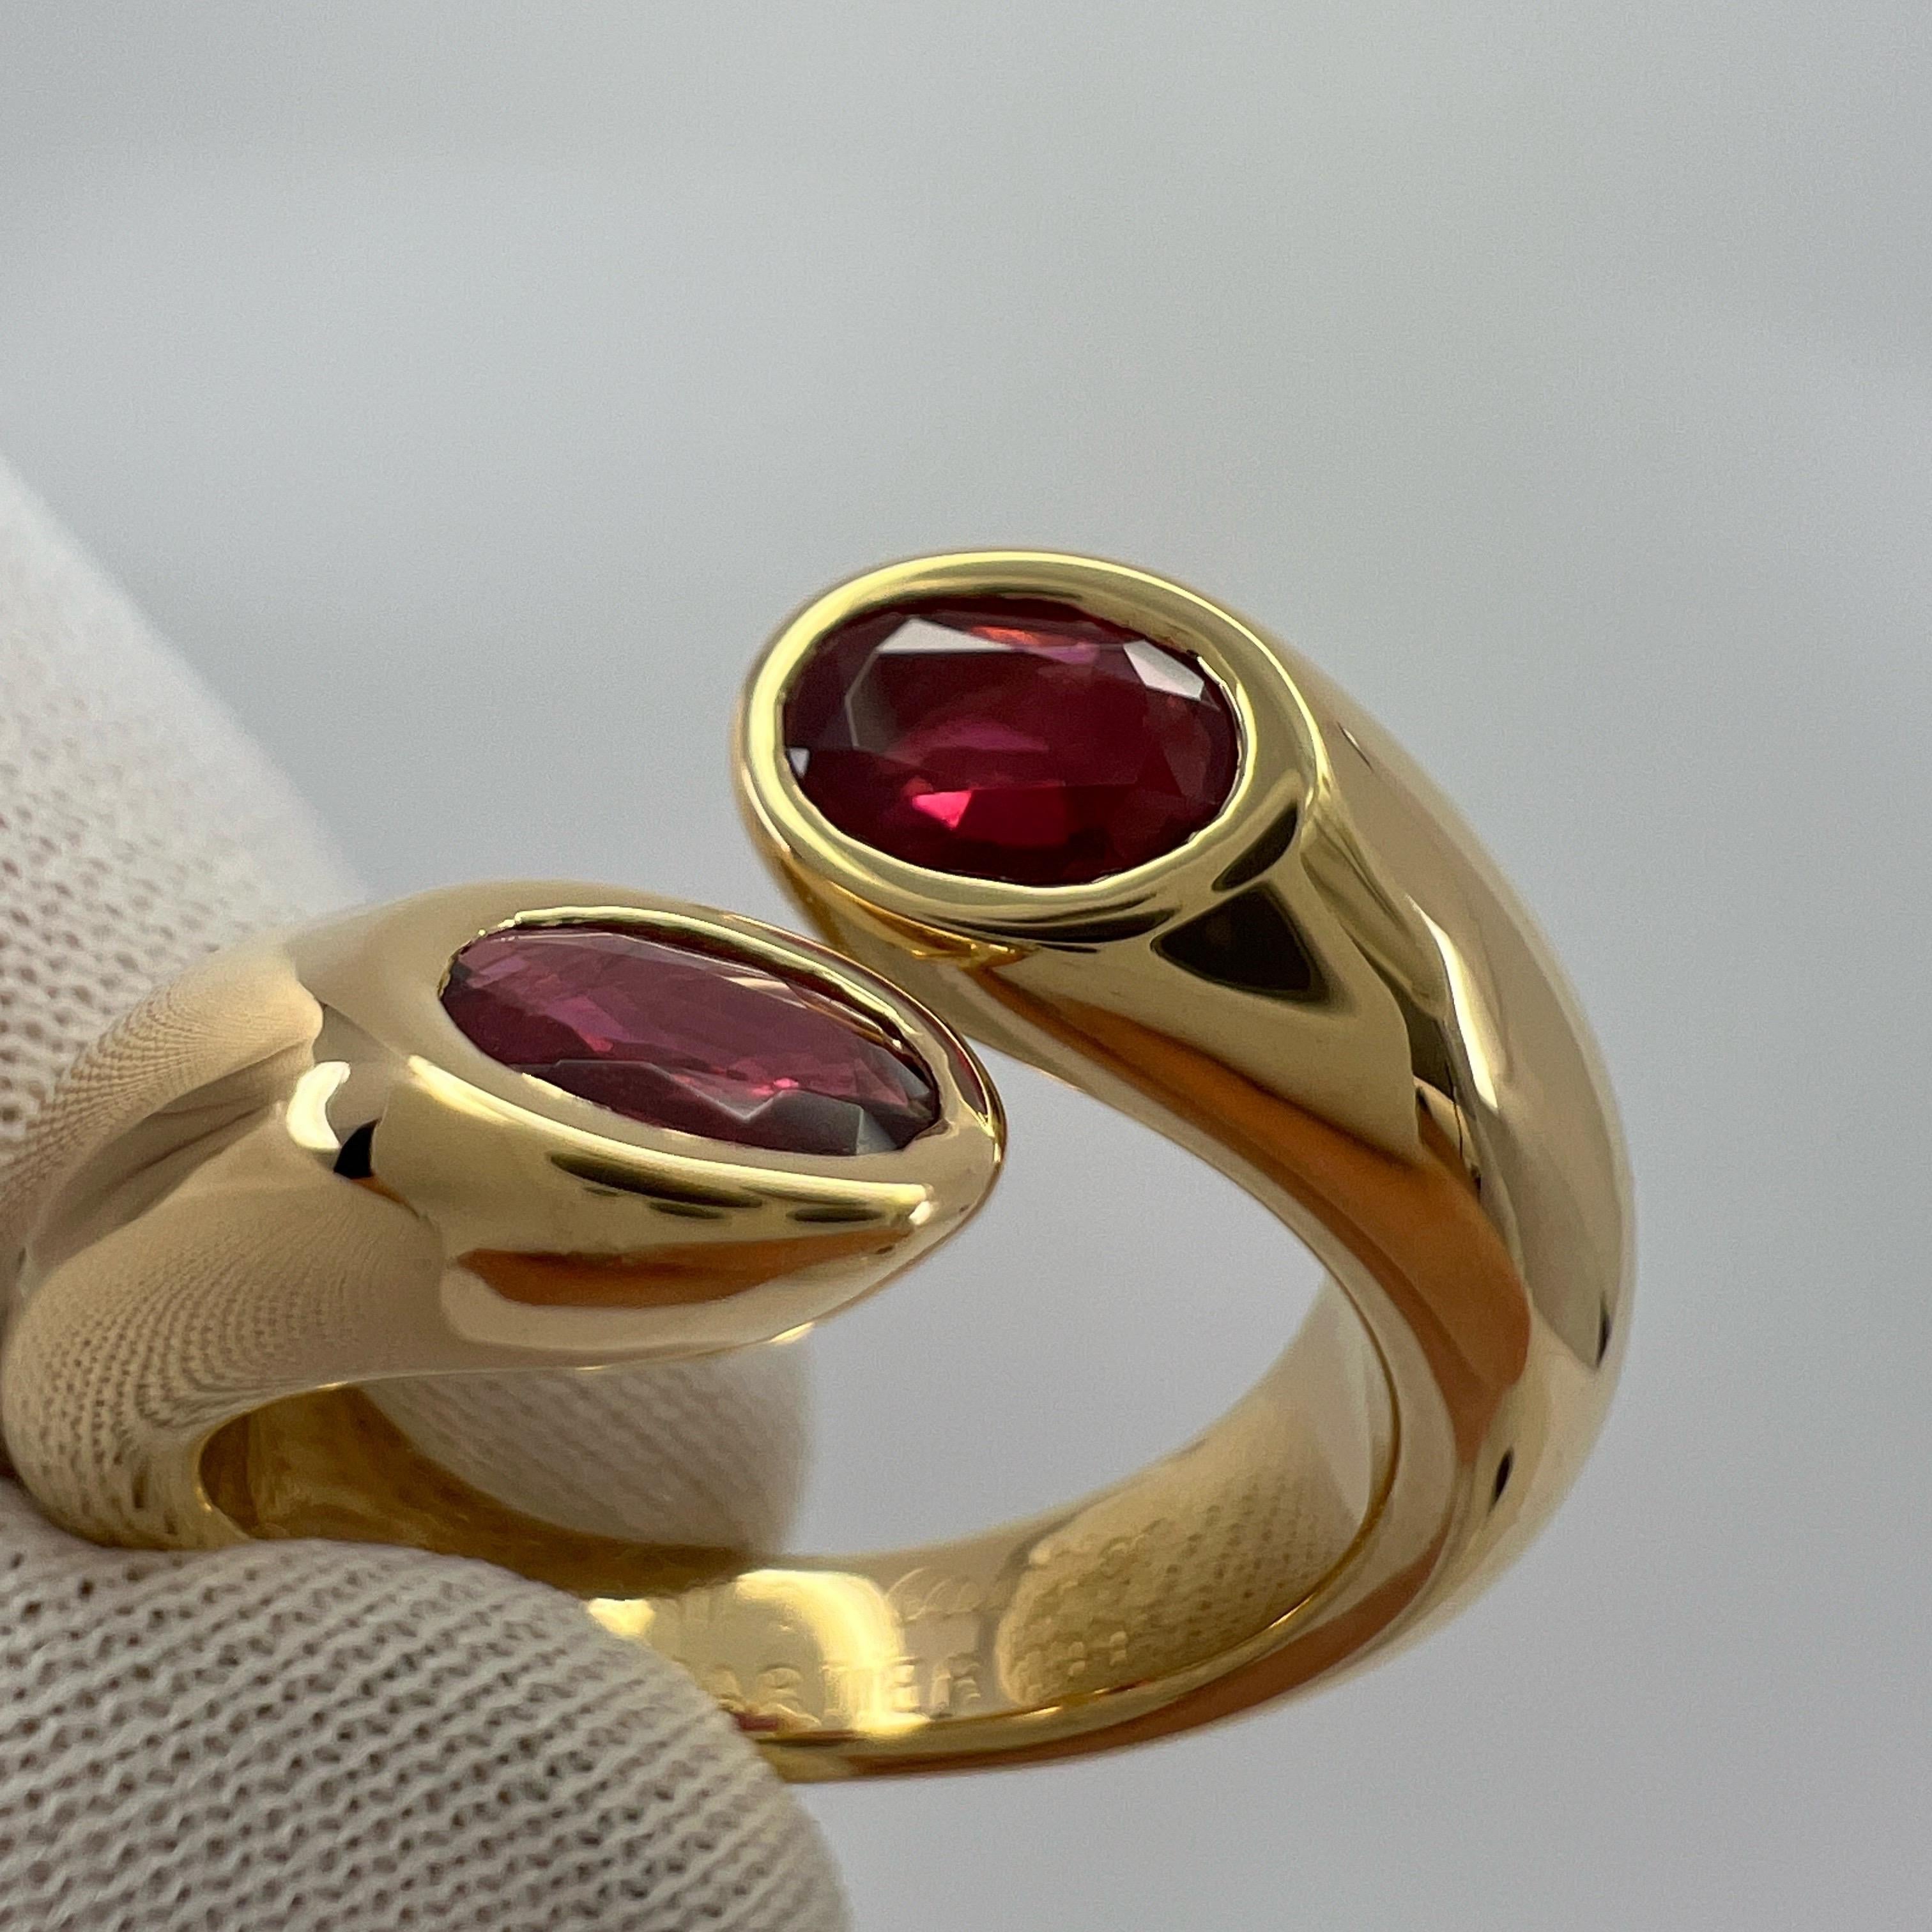 Rare Vintage Cartier Red Ruby Ellipse Oval Cut 18k Gold Bypass Split Ring 6.5 52 8